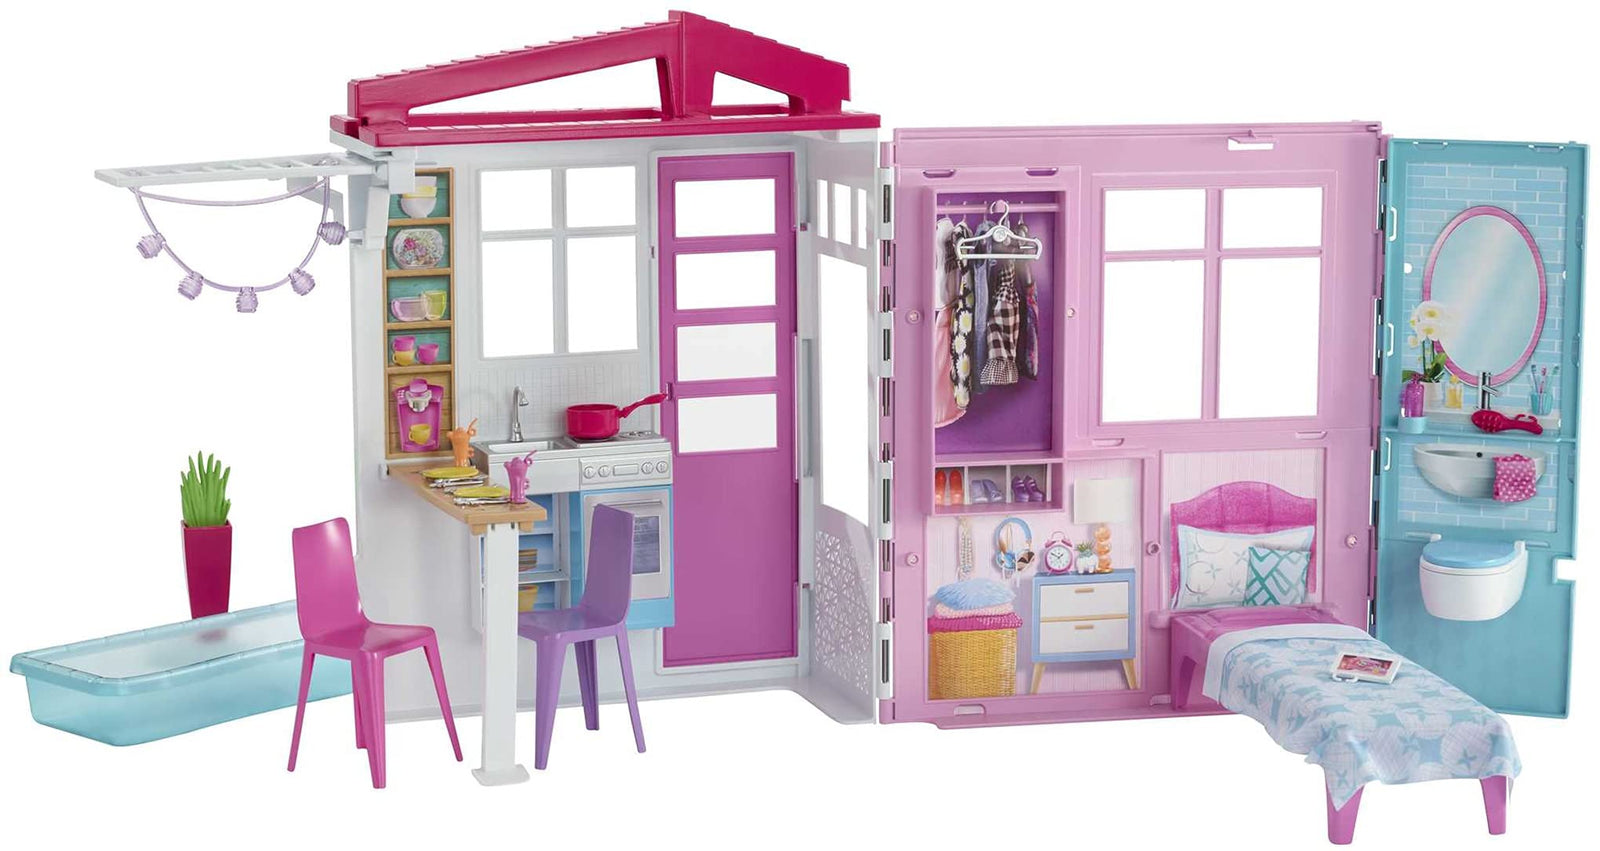 Mattel Barbie Dollhouse, Portable 1-Story Playset with Pool and Accessories, for 3 to 7 Year Olds